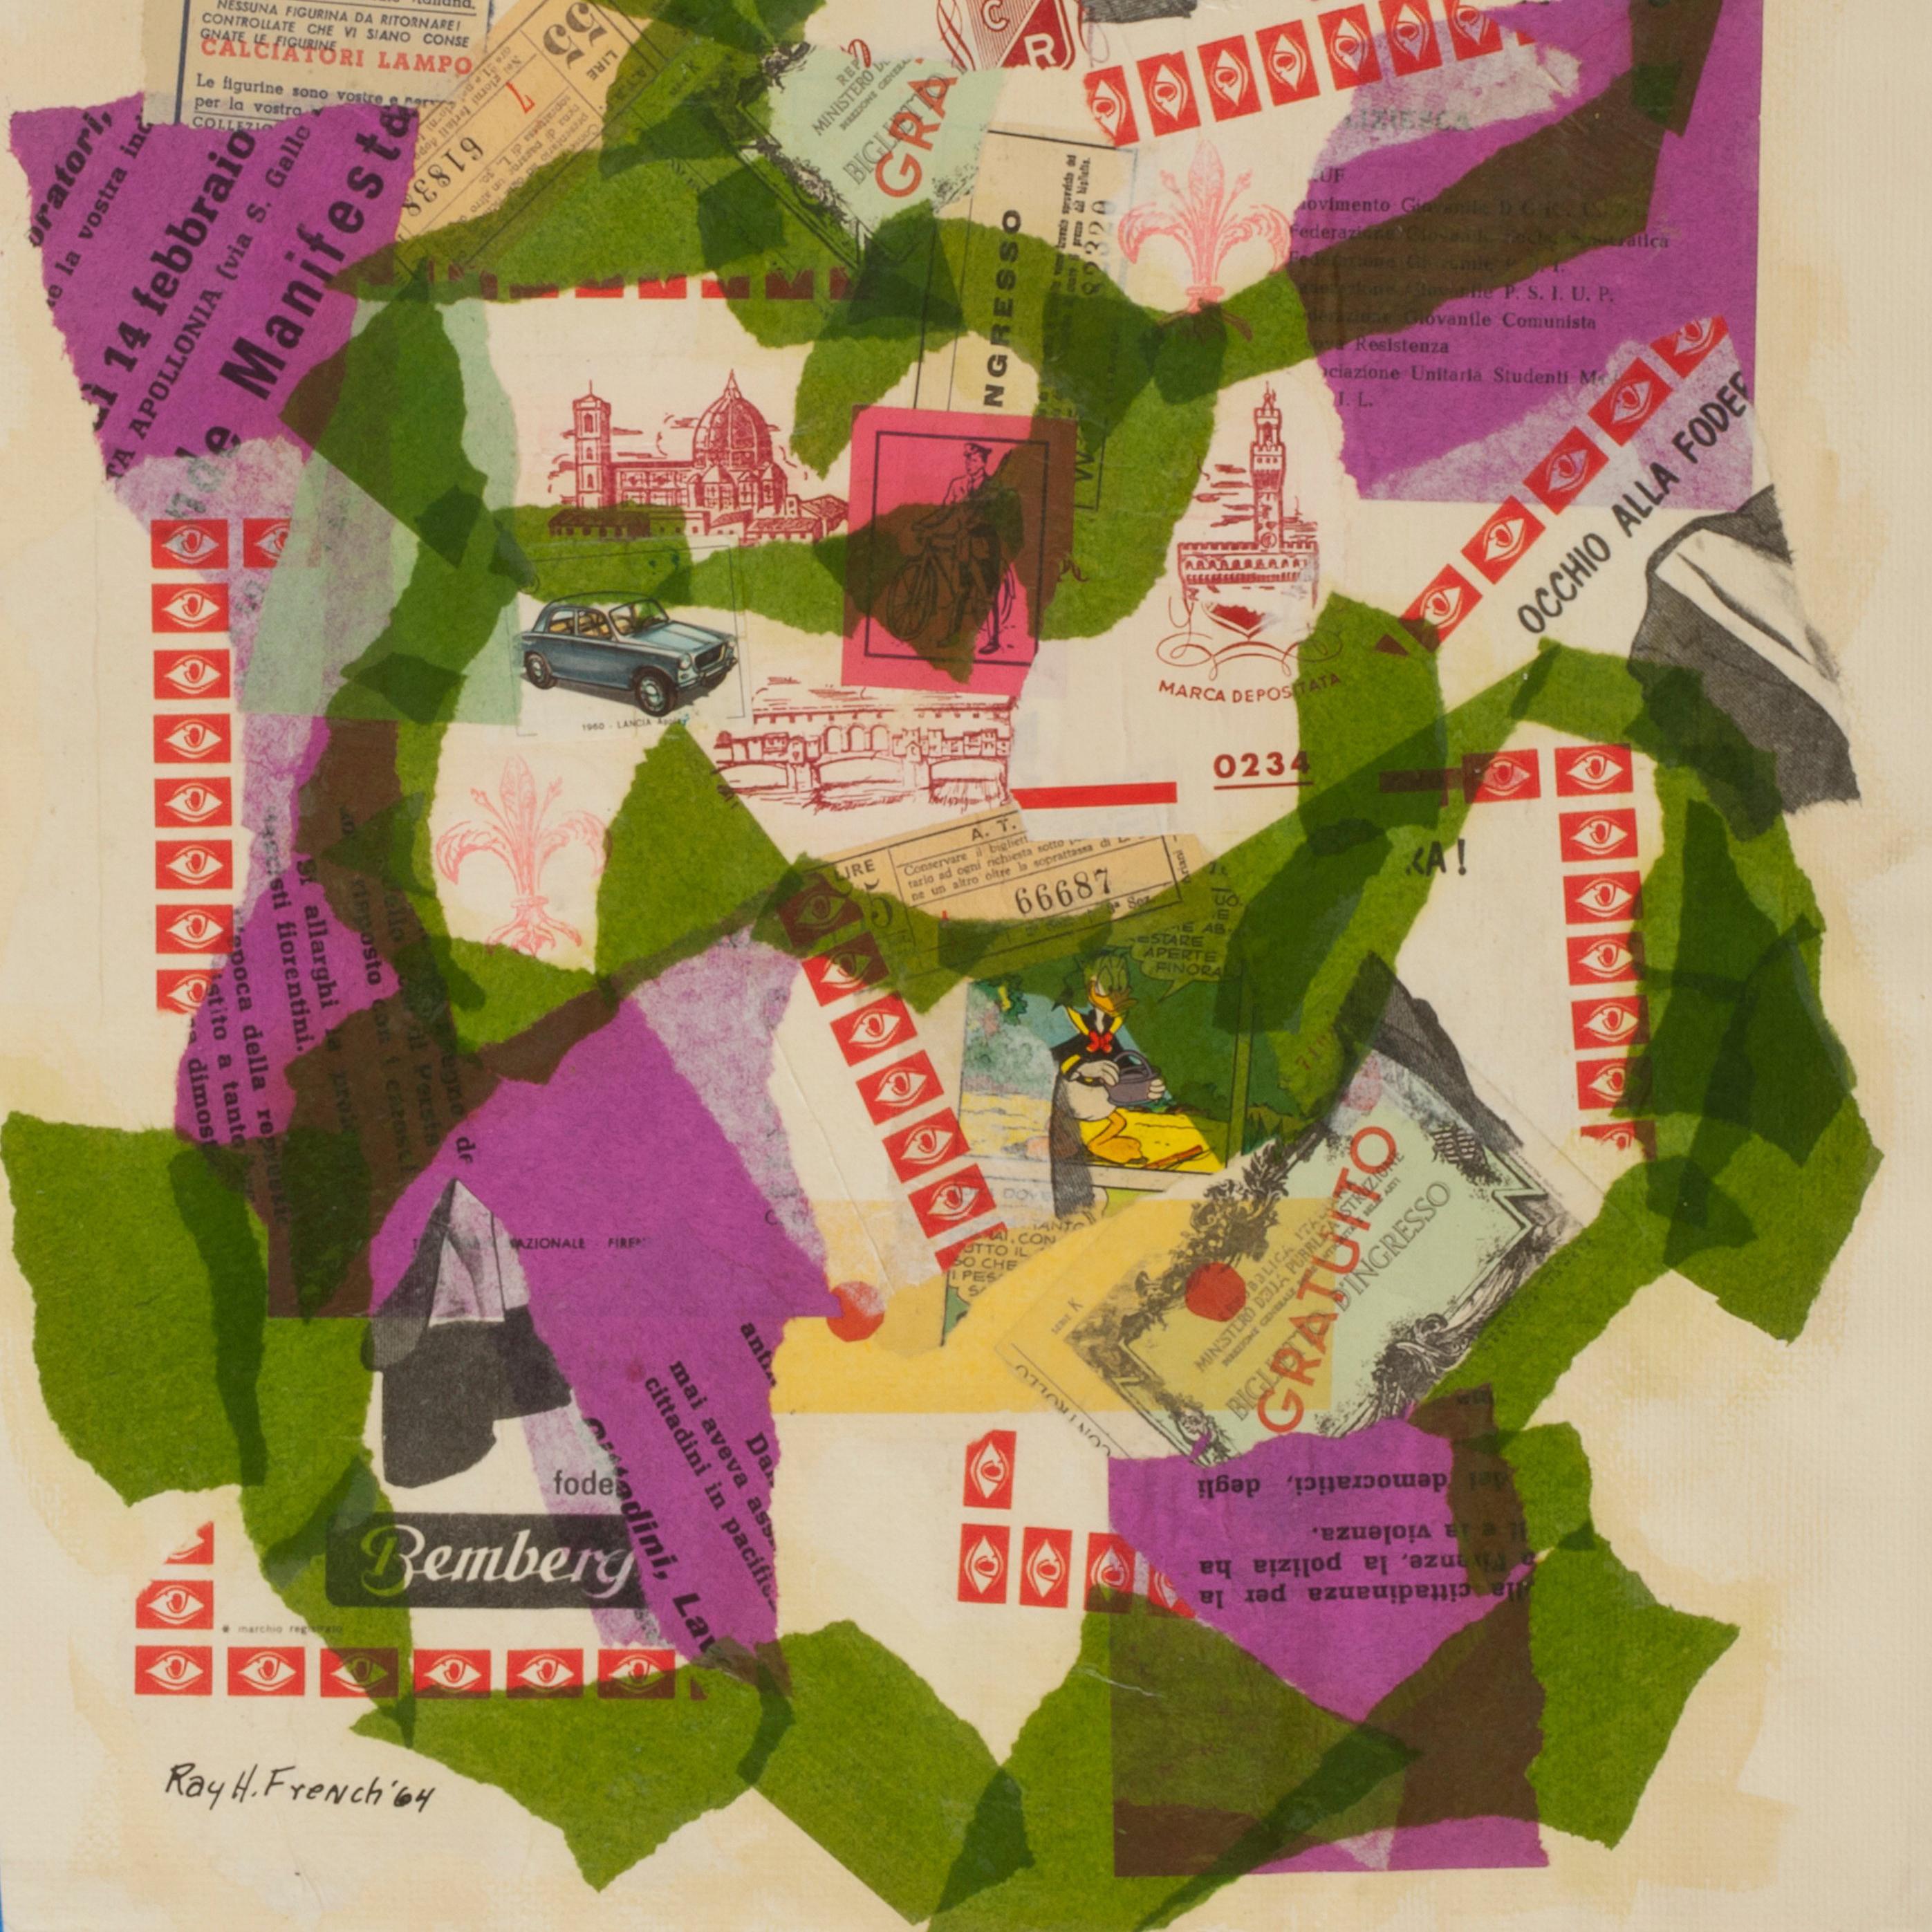 Signed and dated lower left

Created in 1964 while the artist was living in Florence, Italy

Collage with tissue paper and printed images and text

From the Estate of the Artist